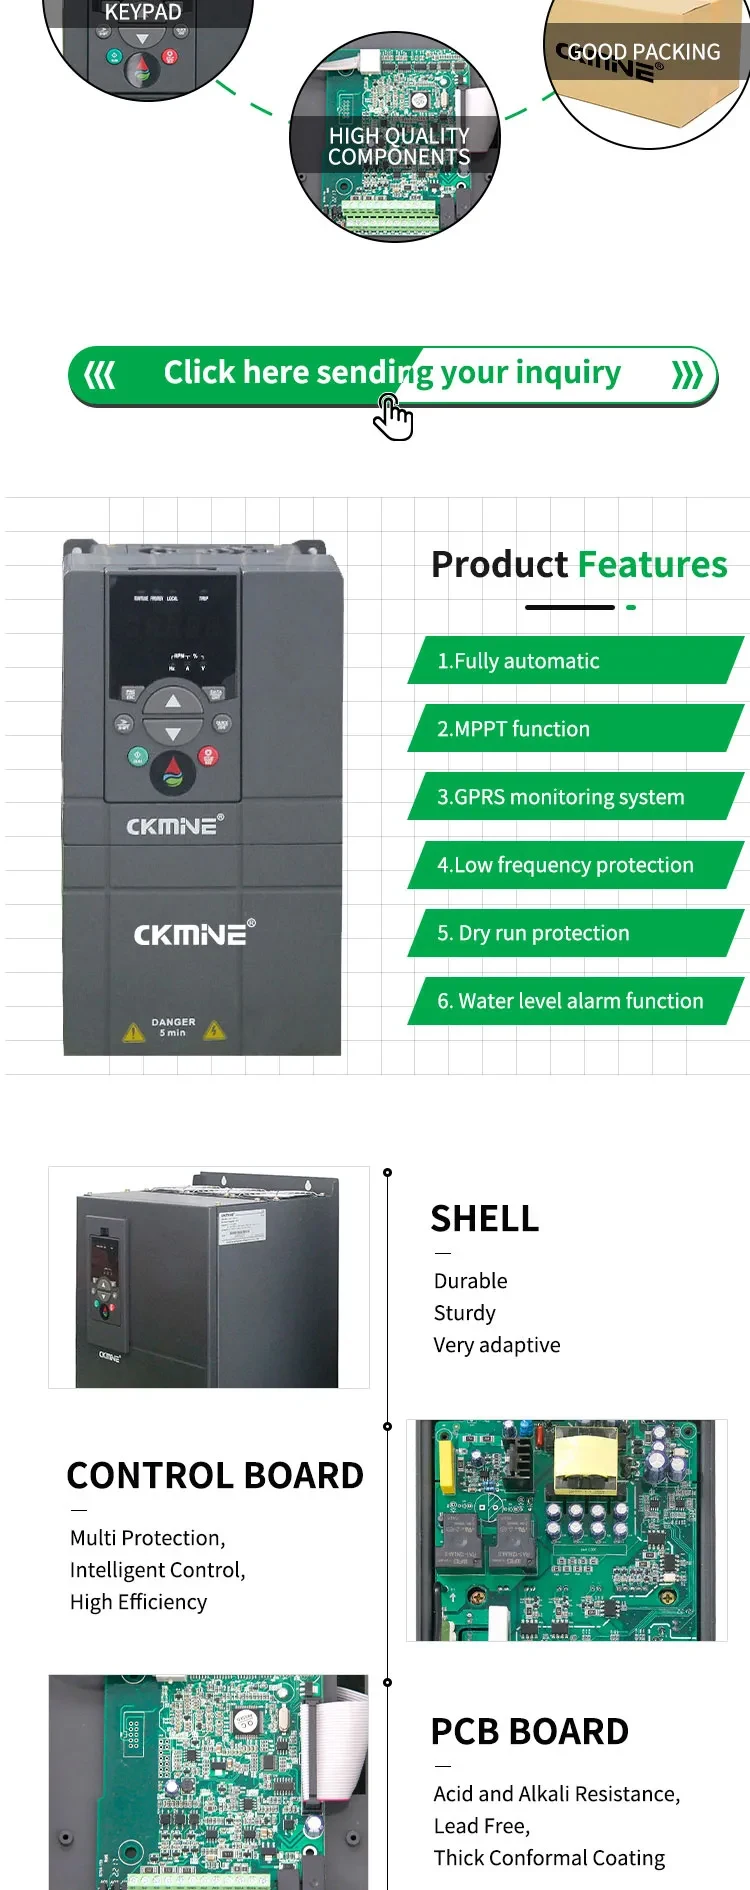 CKMINE Solar Pump VFD 4kW 5.5HP Well Pumping Motor Drive 3 Phase 220V Frequency Inverter for Agriculture Irrigation System manufacture